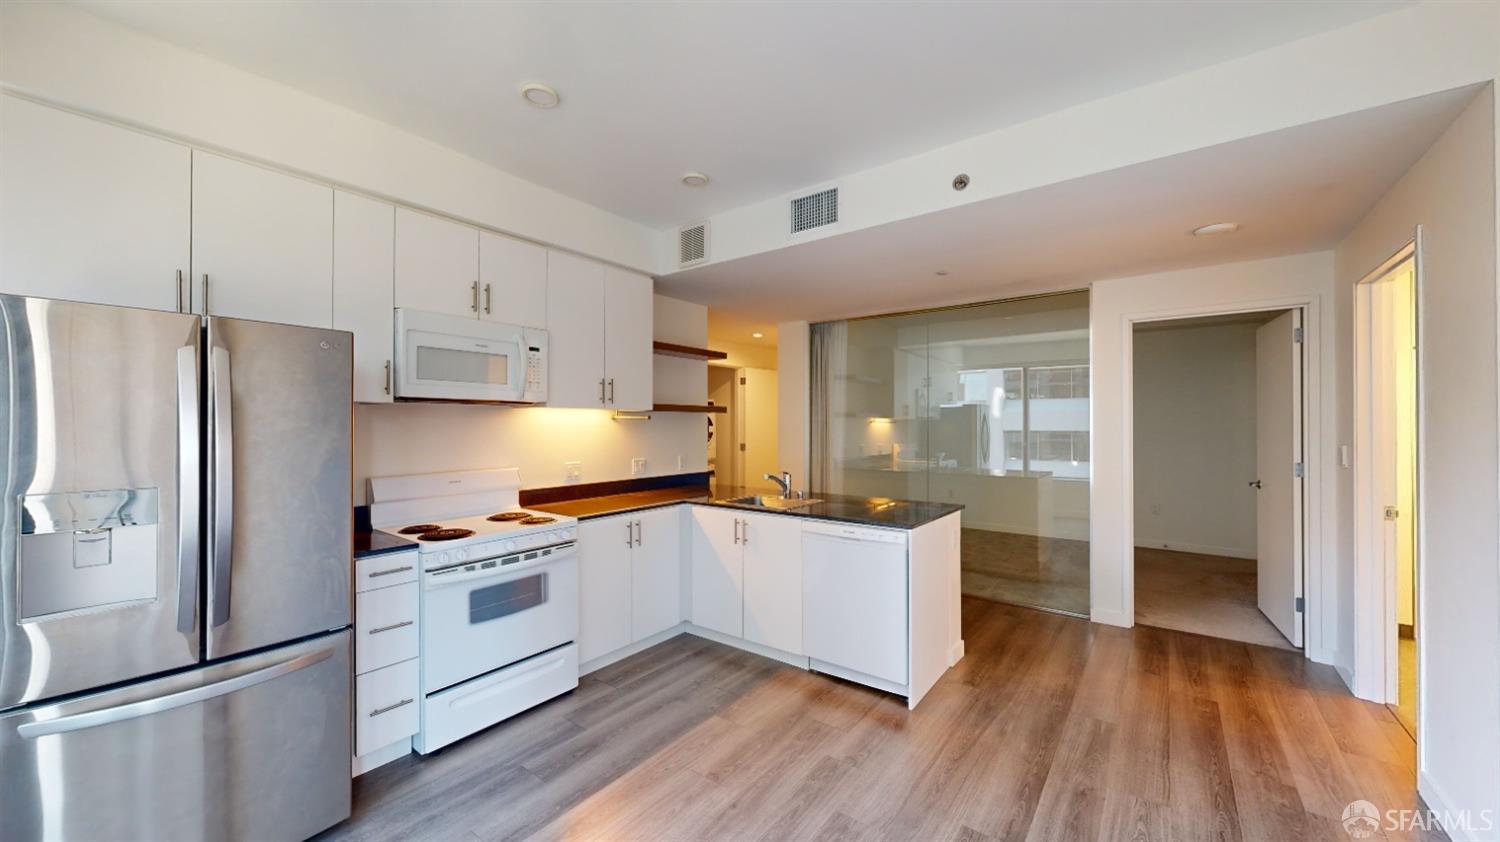 Photo of 280 Spear St #16H in San Francisco, CA